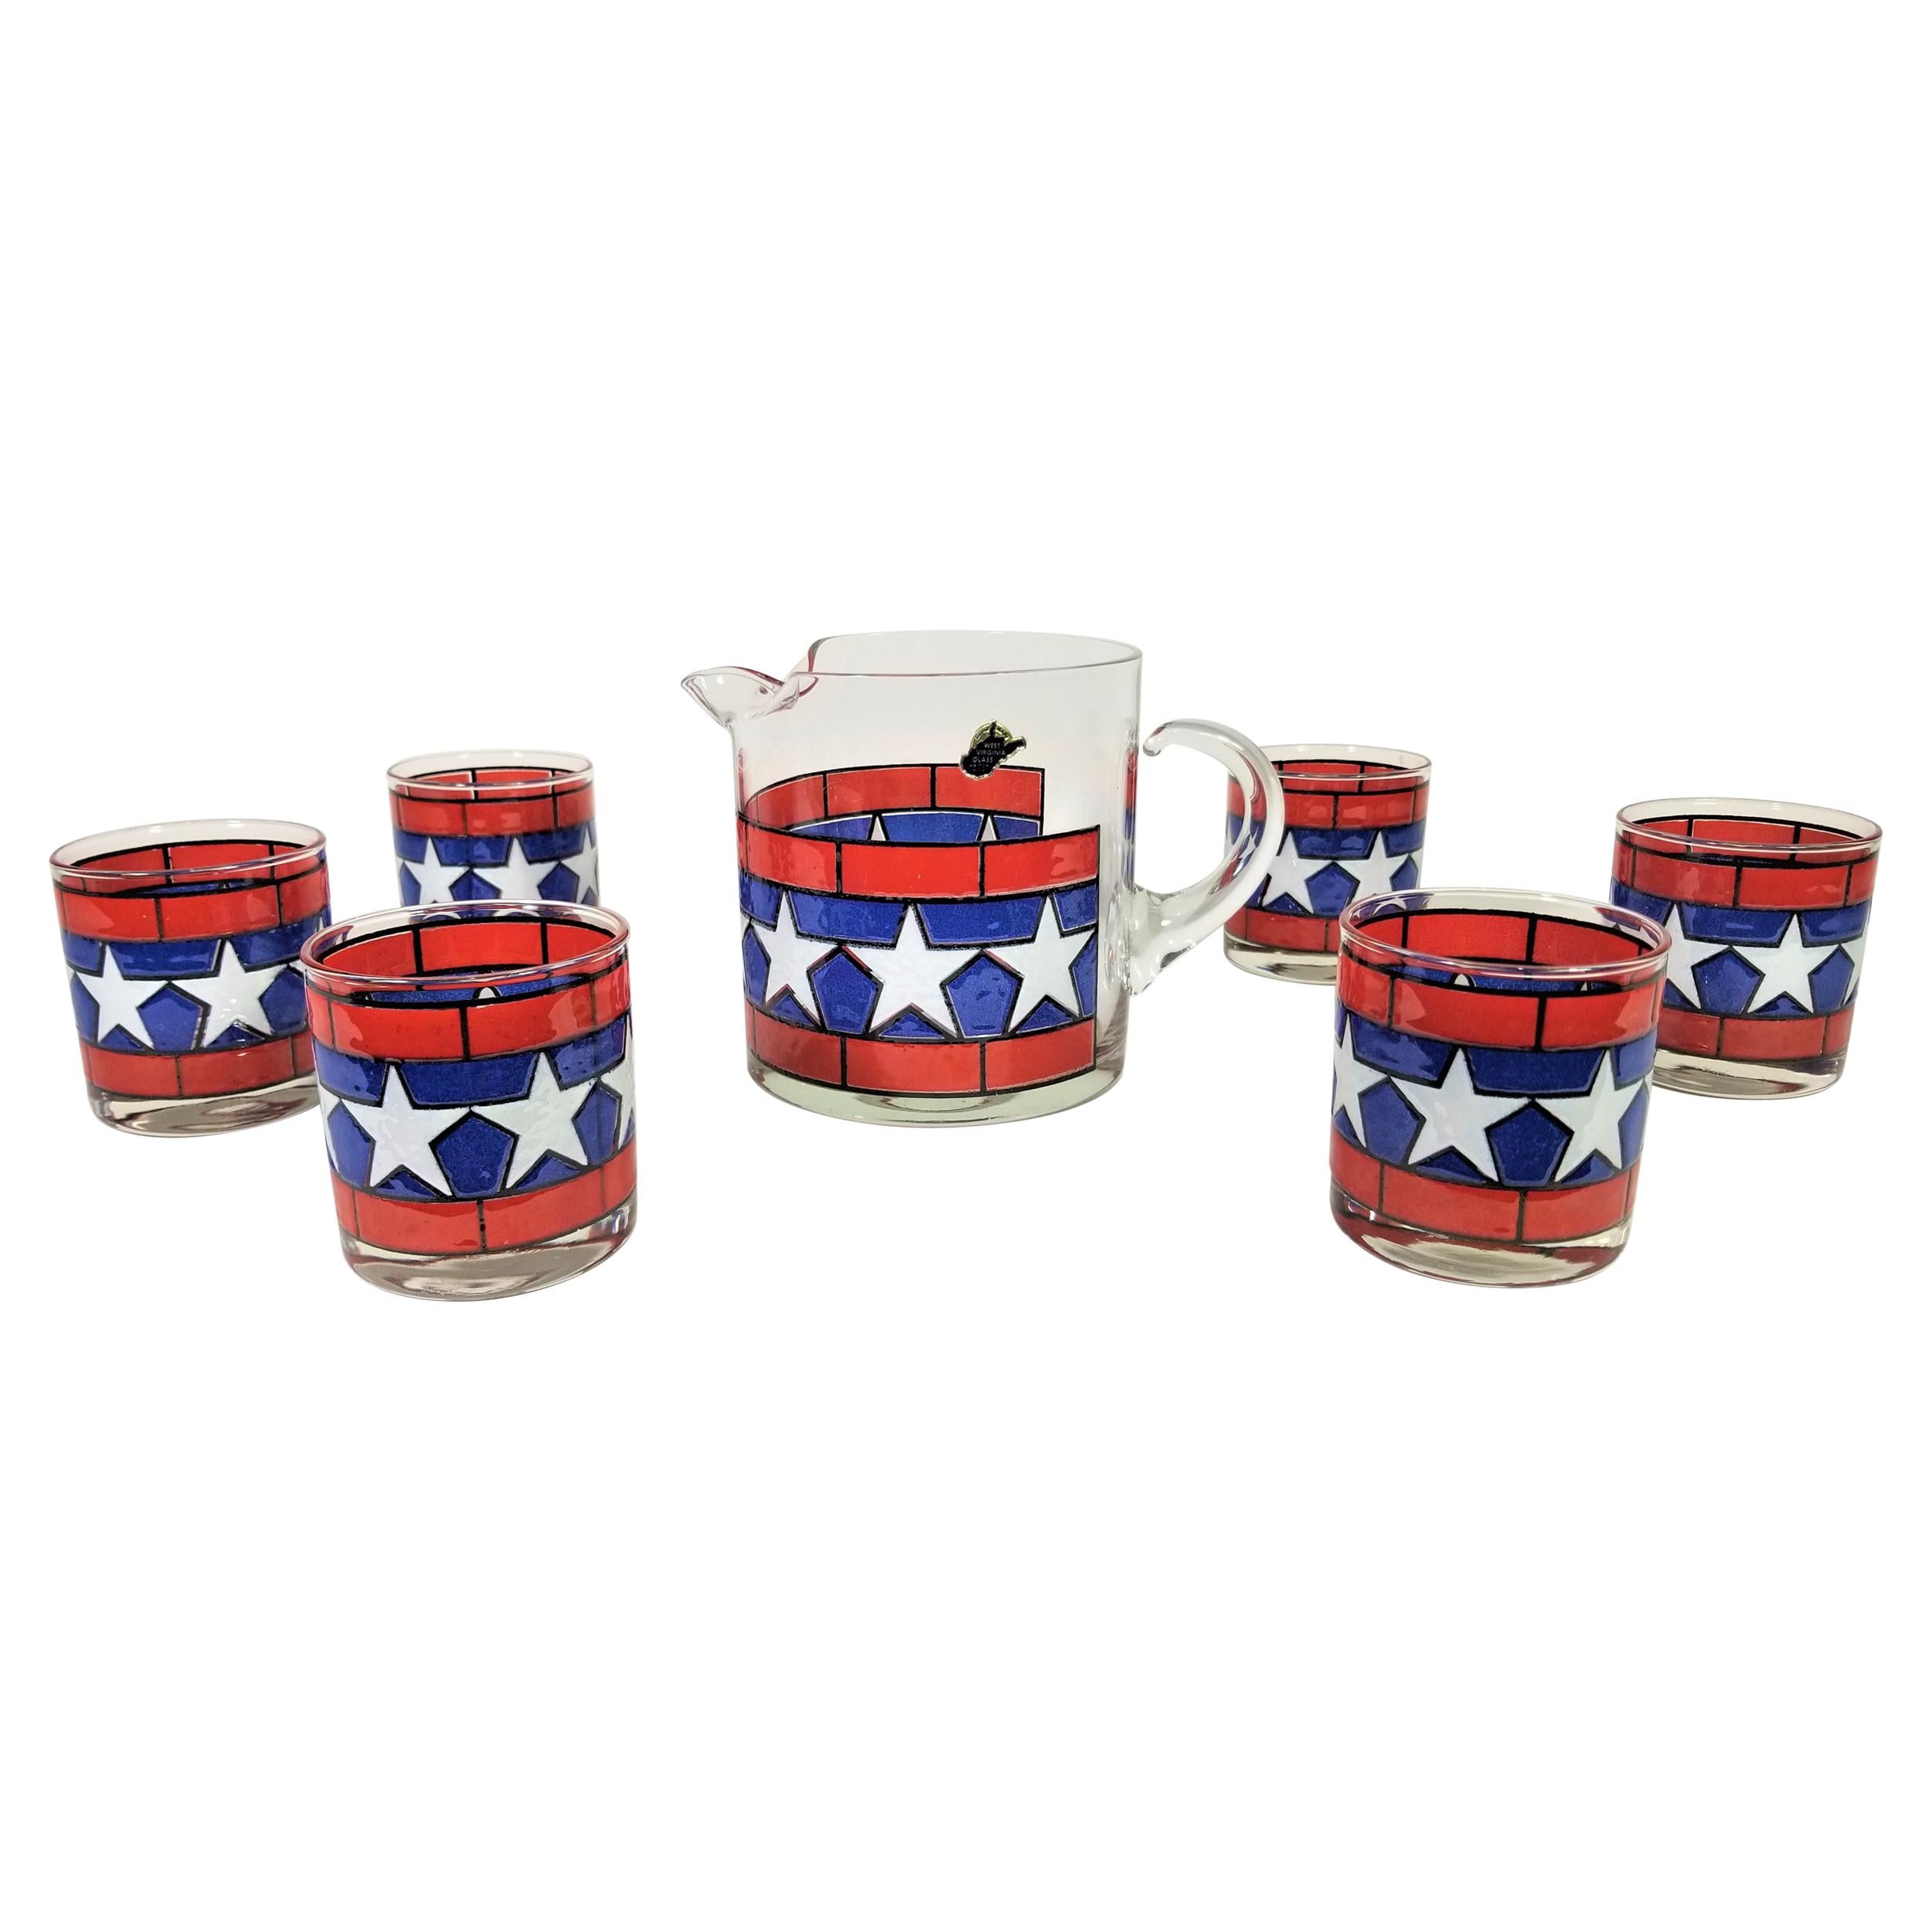 1970s, Red, White and Blue with Stars Glassware Barware Set of 6 with Pitcher